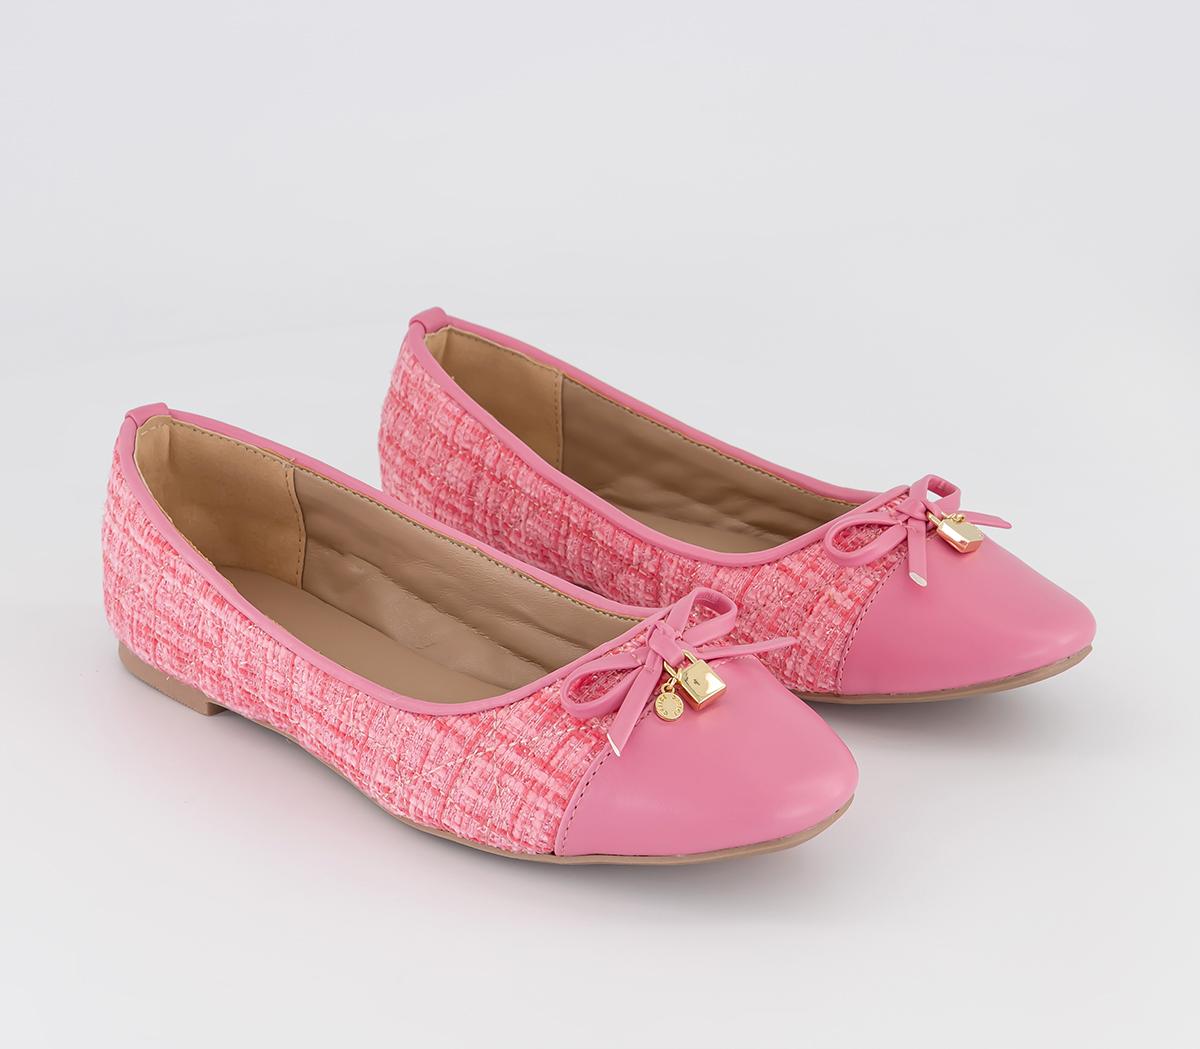 OFFICE Womens Forevermore Charm Ballet Pumps Pink, 7